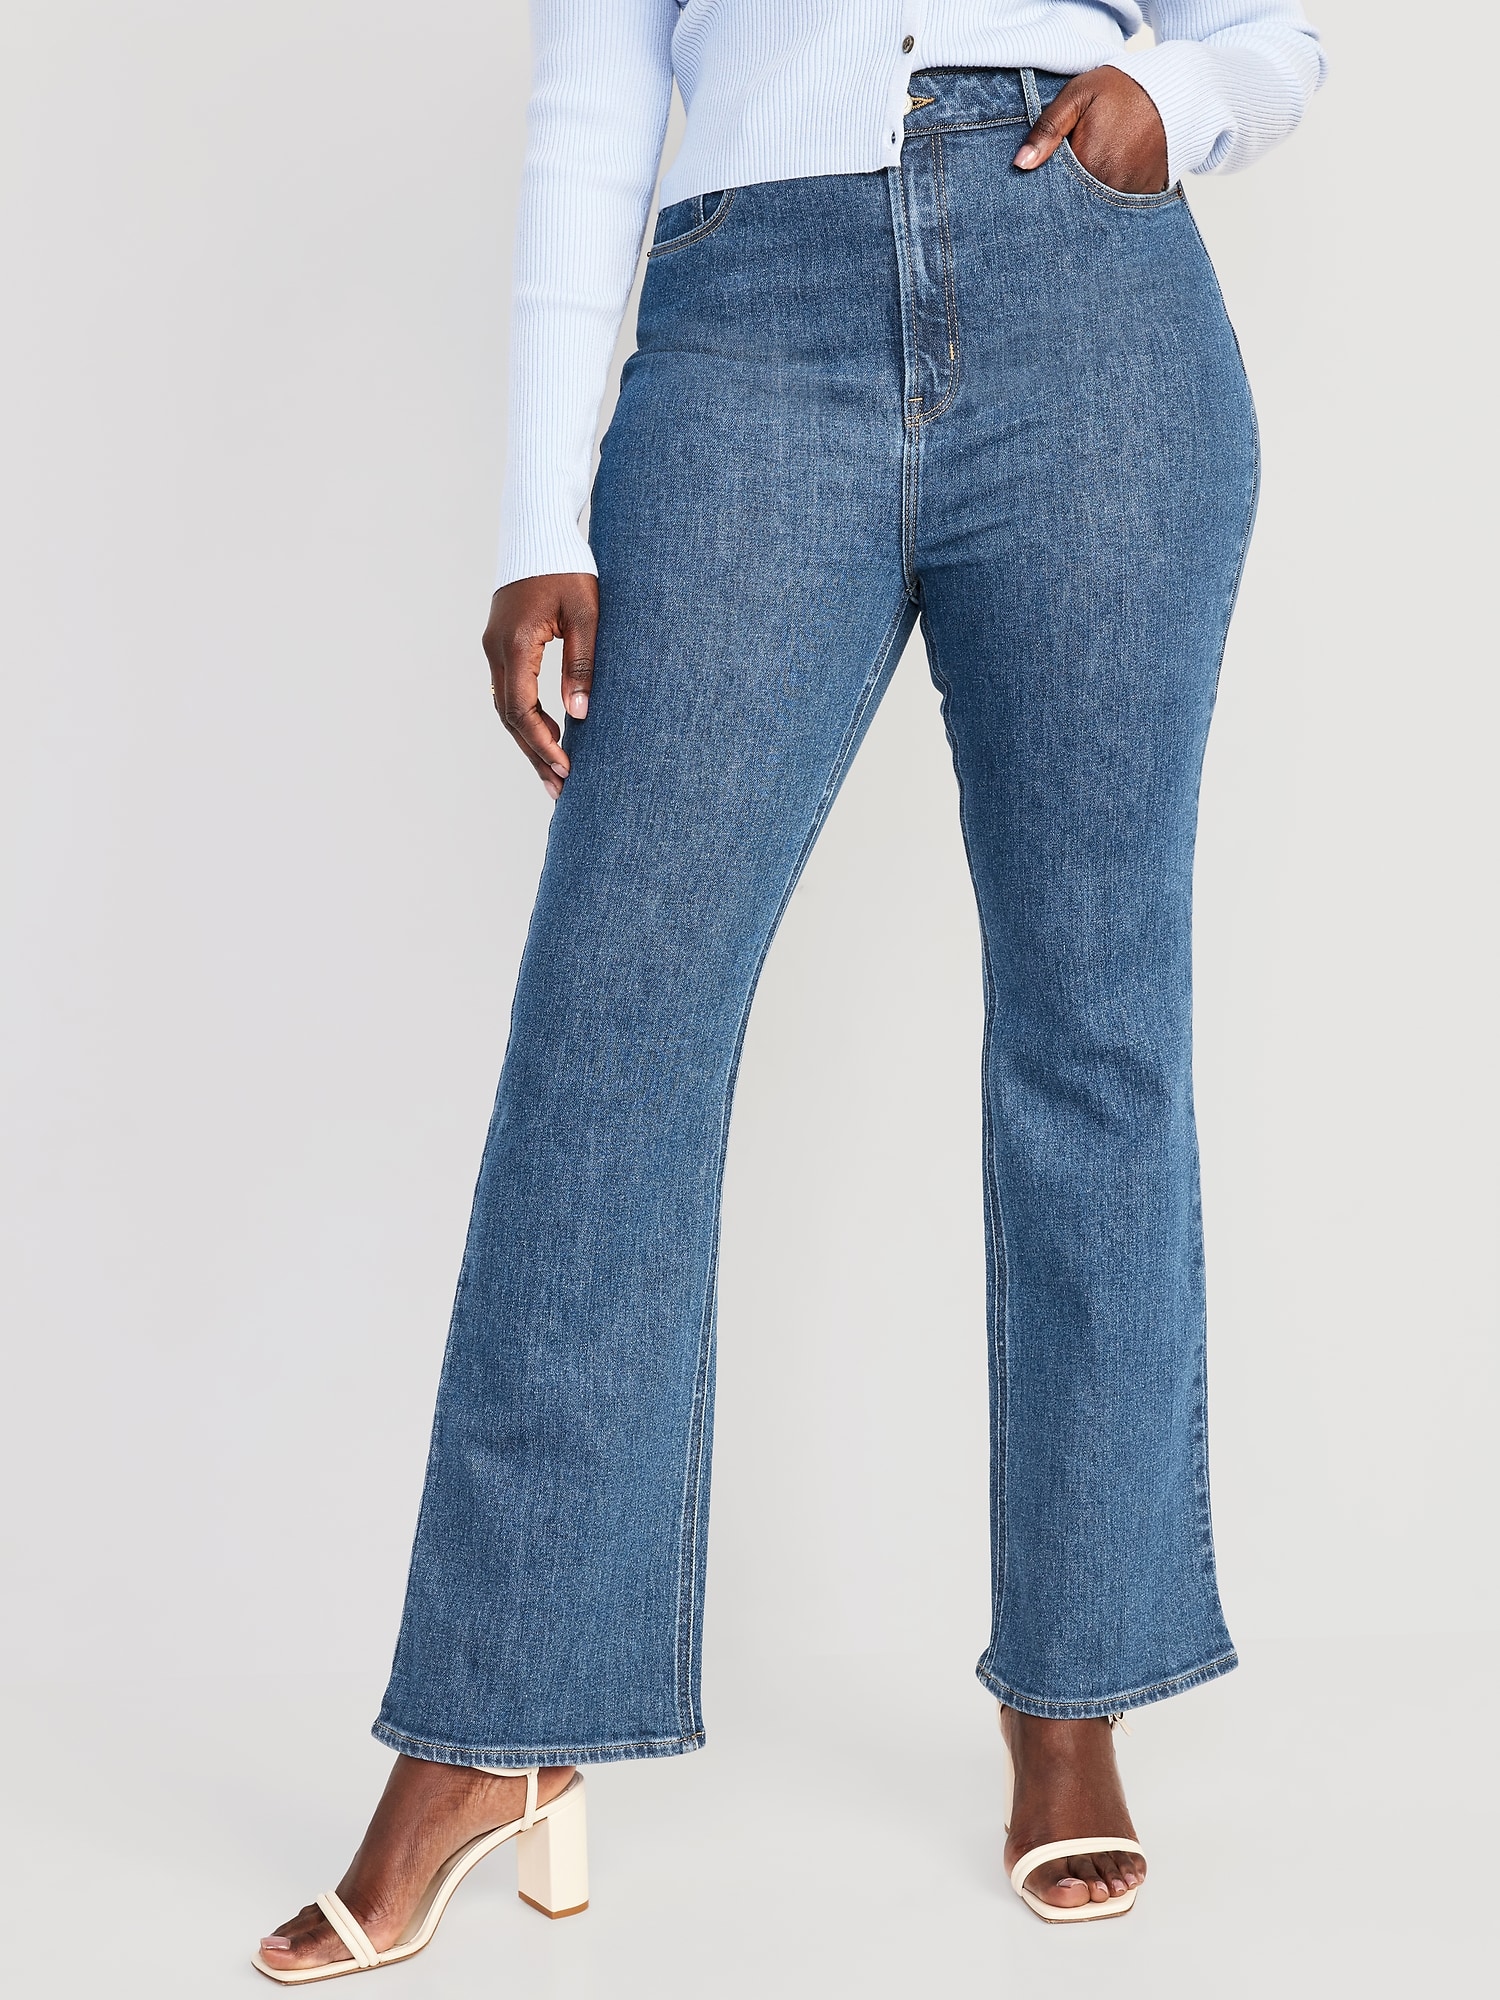 High-Waisted Eco-Friendly Vintage Flare Jeans For Women, Old Navy